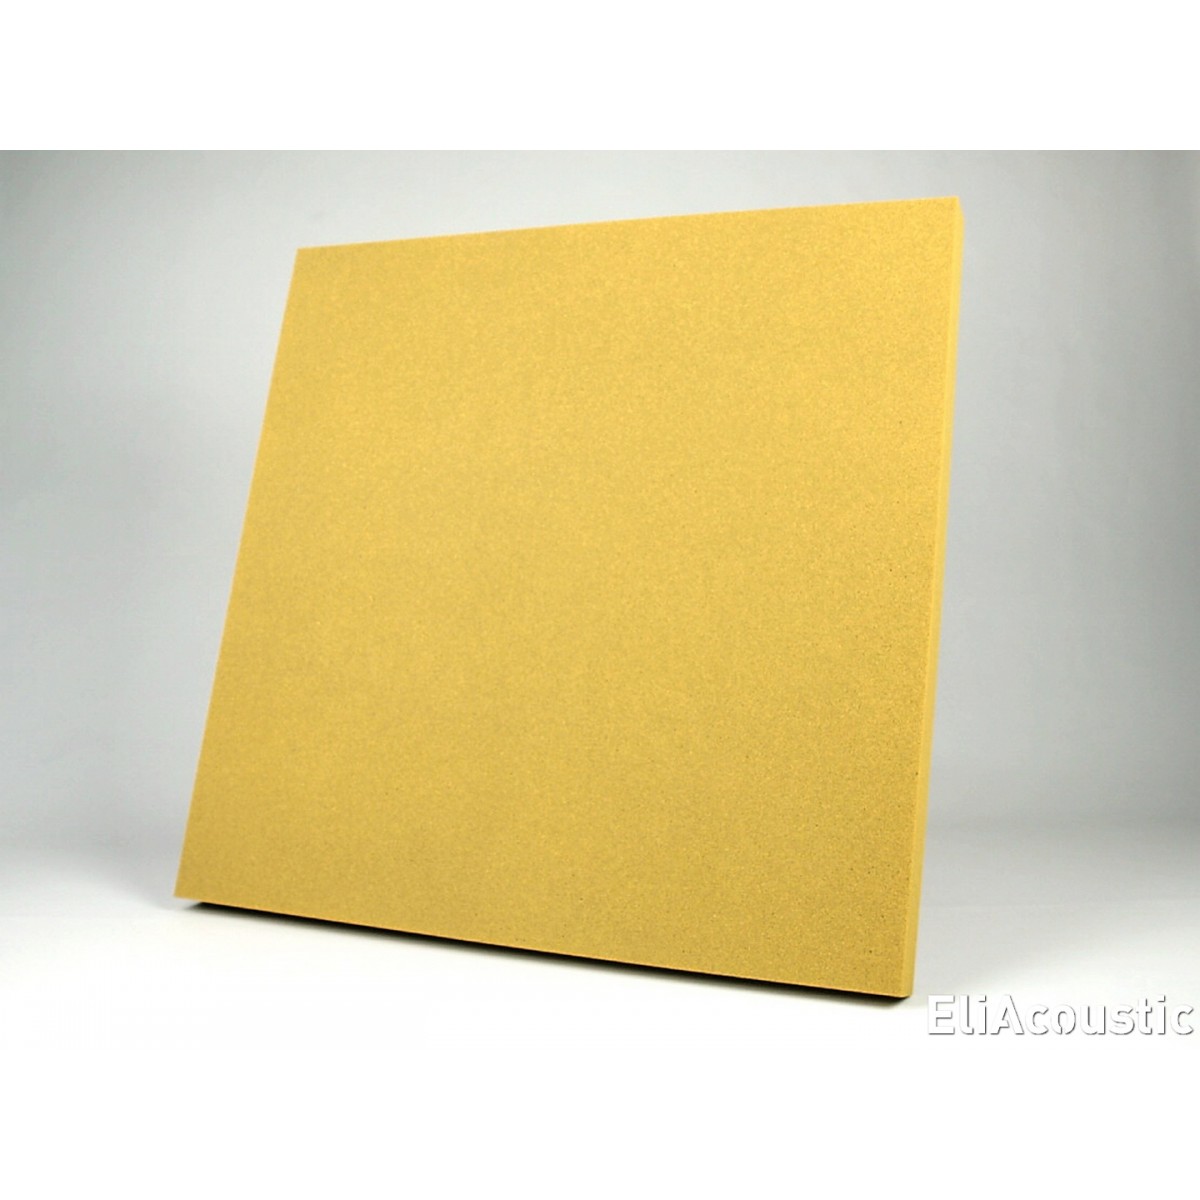 EliAcoustic Regular 60.2 Pure Yellow